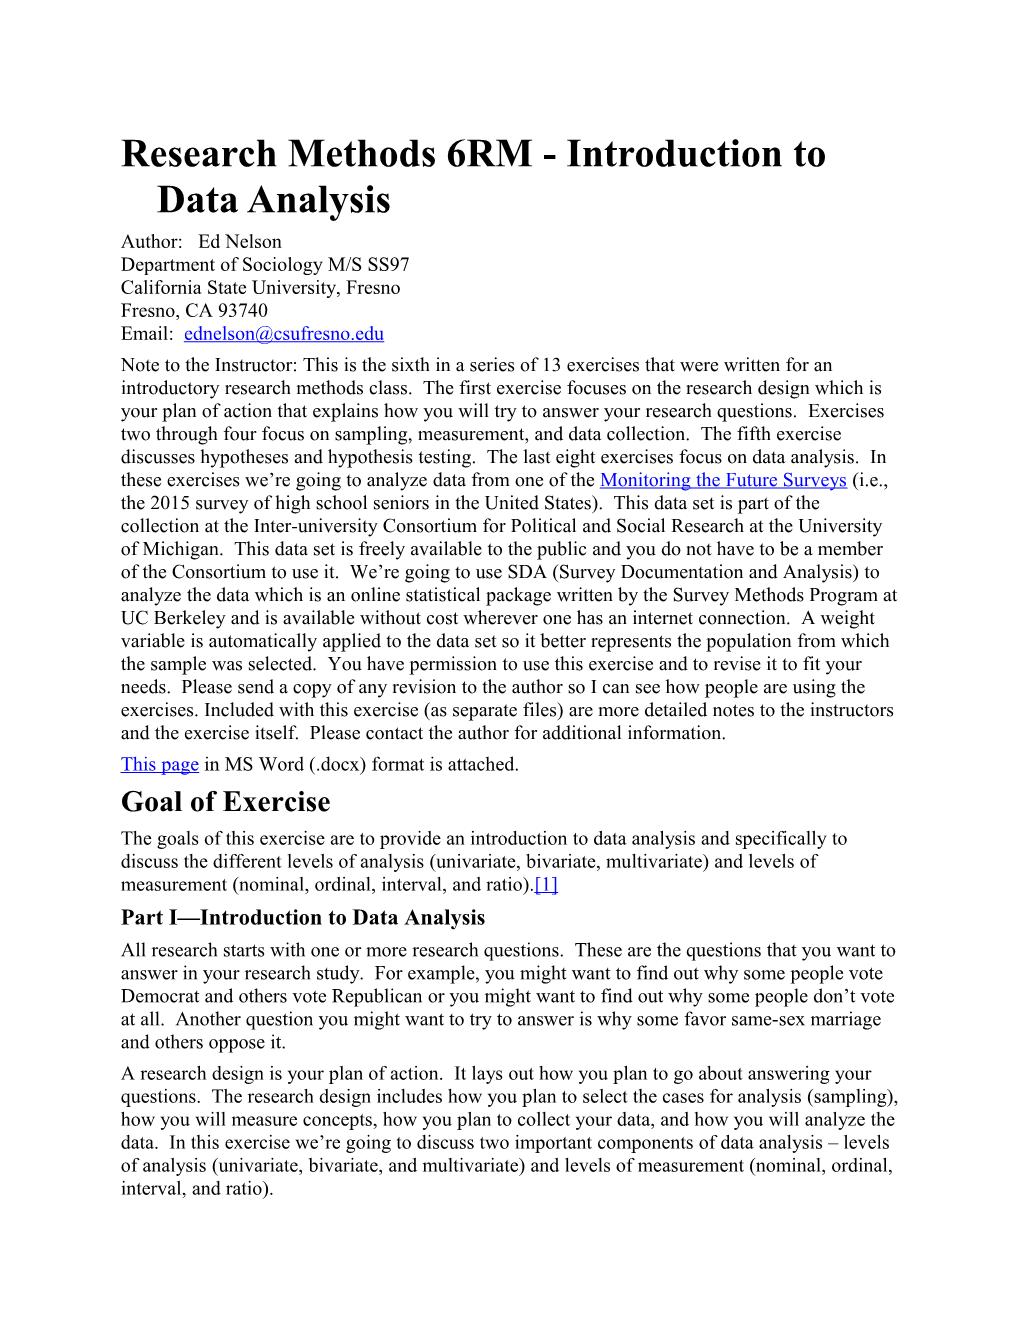 Research Methods 6RM - Introduction to Data Analysis